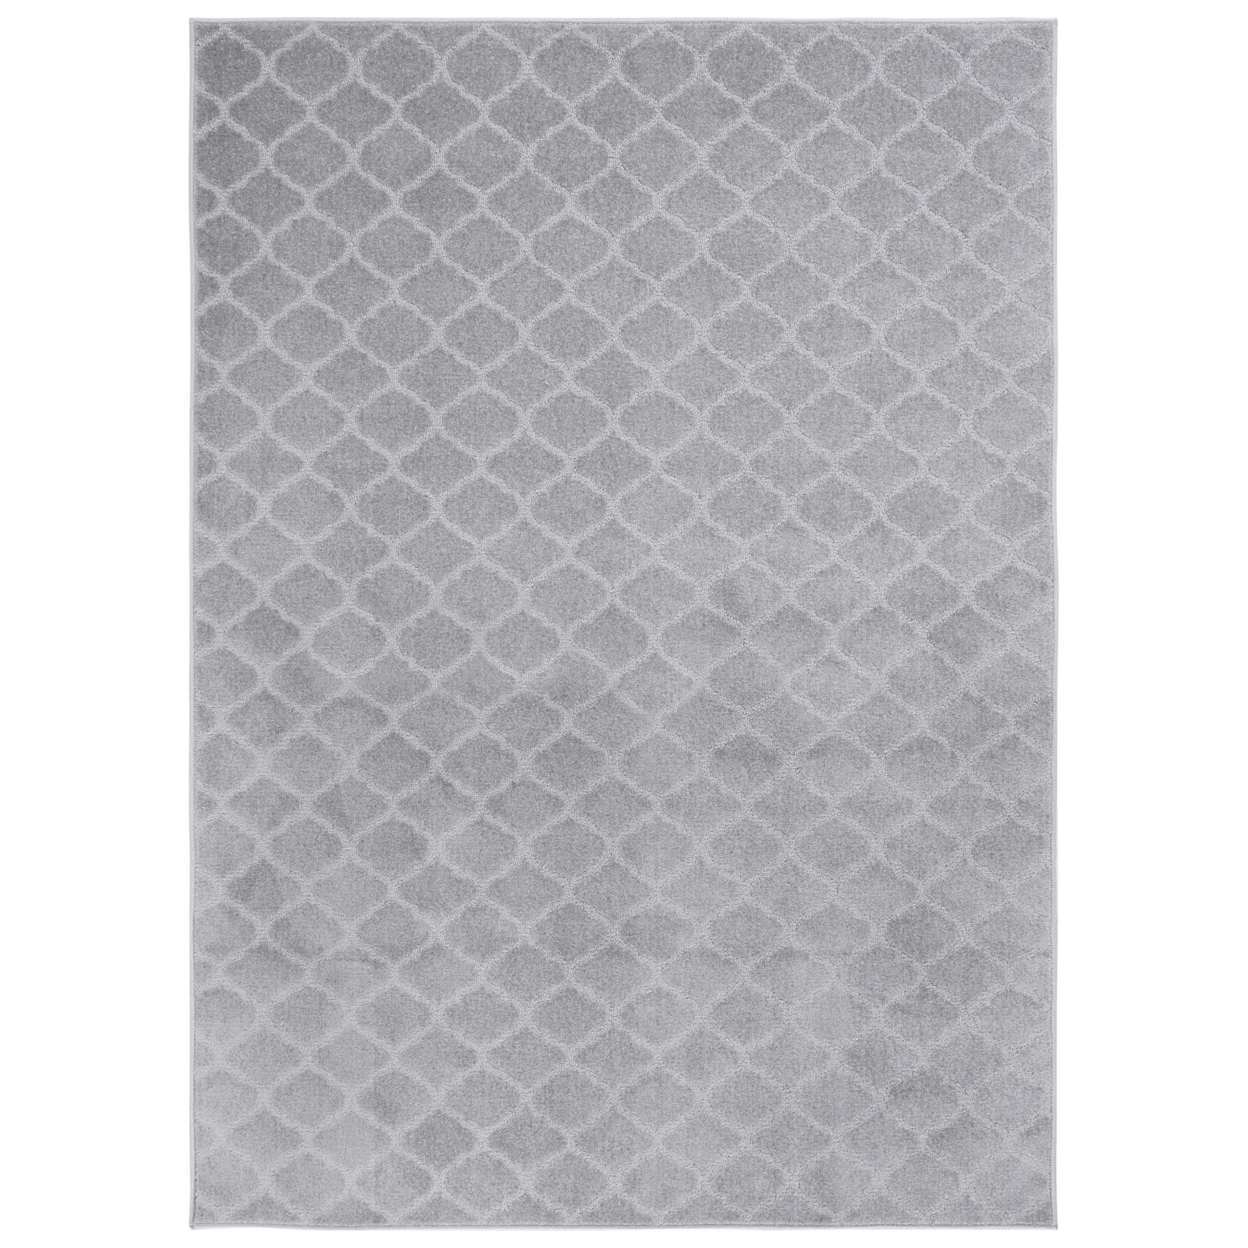 Safavieh PNS404F Pattern And Solid Grey - Light Grey / Ivory, 5'-3 X 7'-6 Rectangle